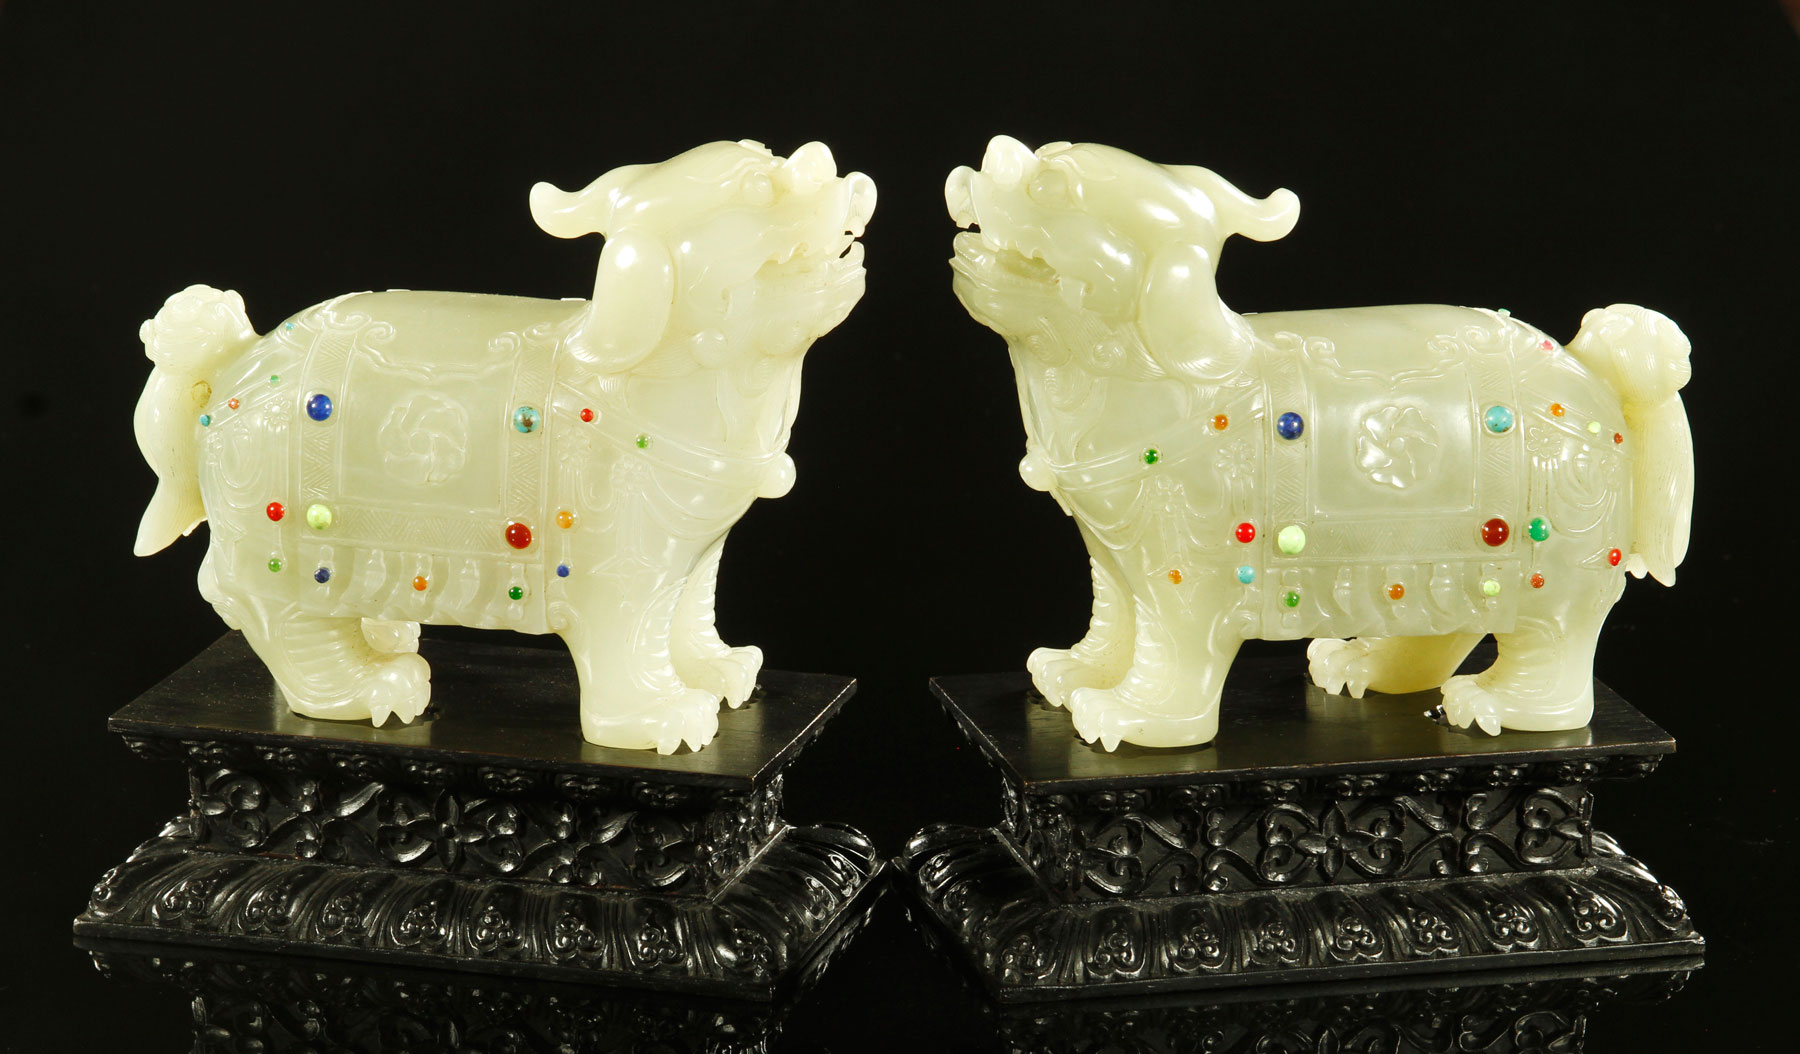 Carved pair of jade foo lions, China, in standing pose and carved wearing garments inlaid with colored semi-precious stones, on hardwood stands, 5" x 6" x 2 1/2", on stand, 7" h.